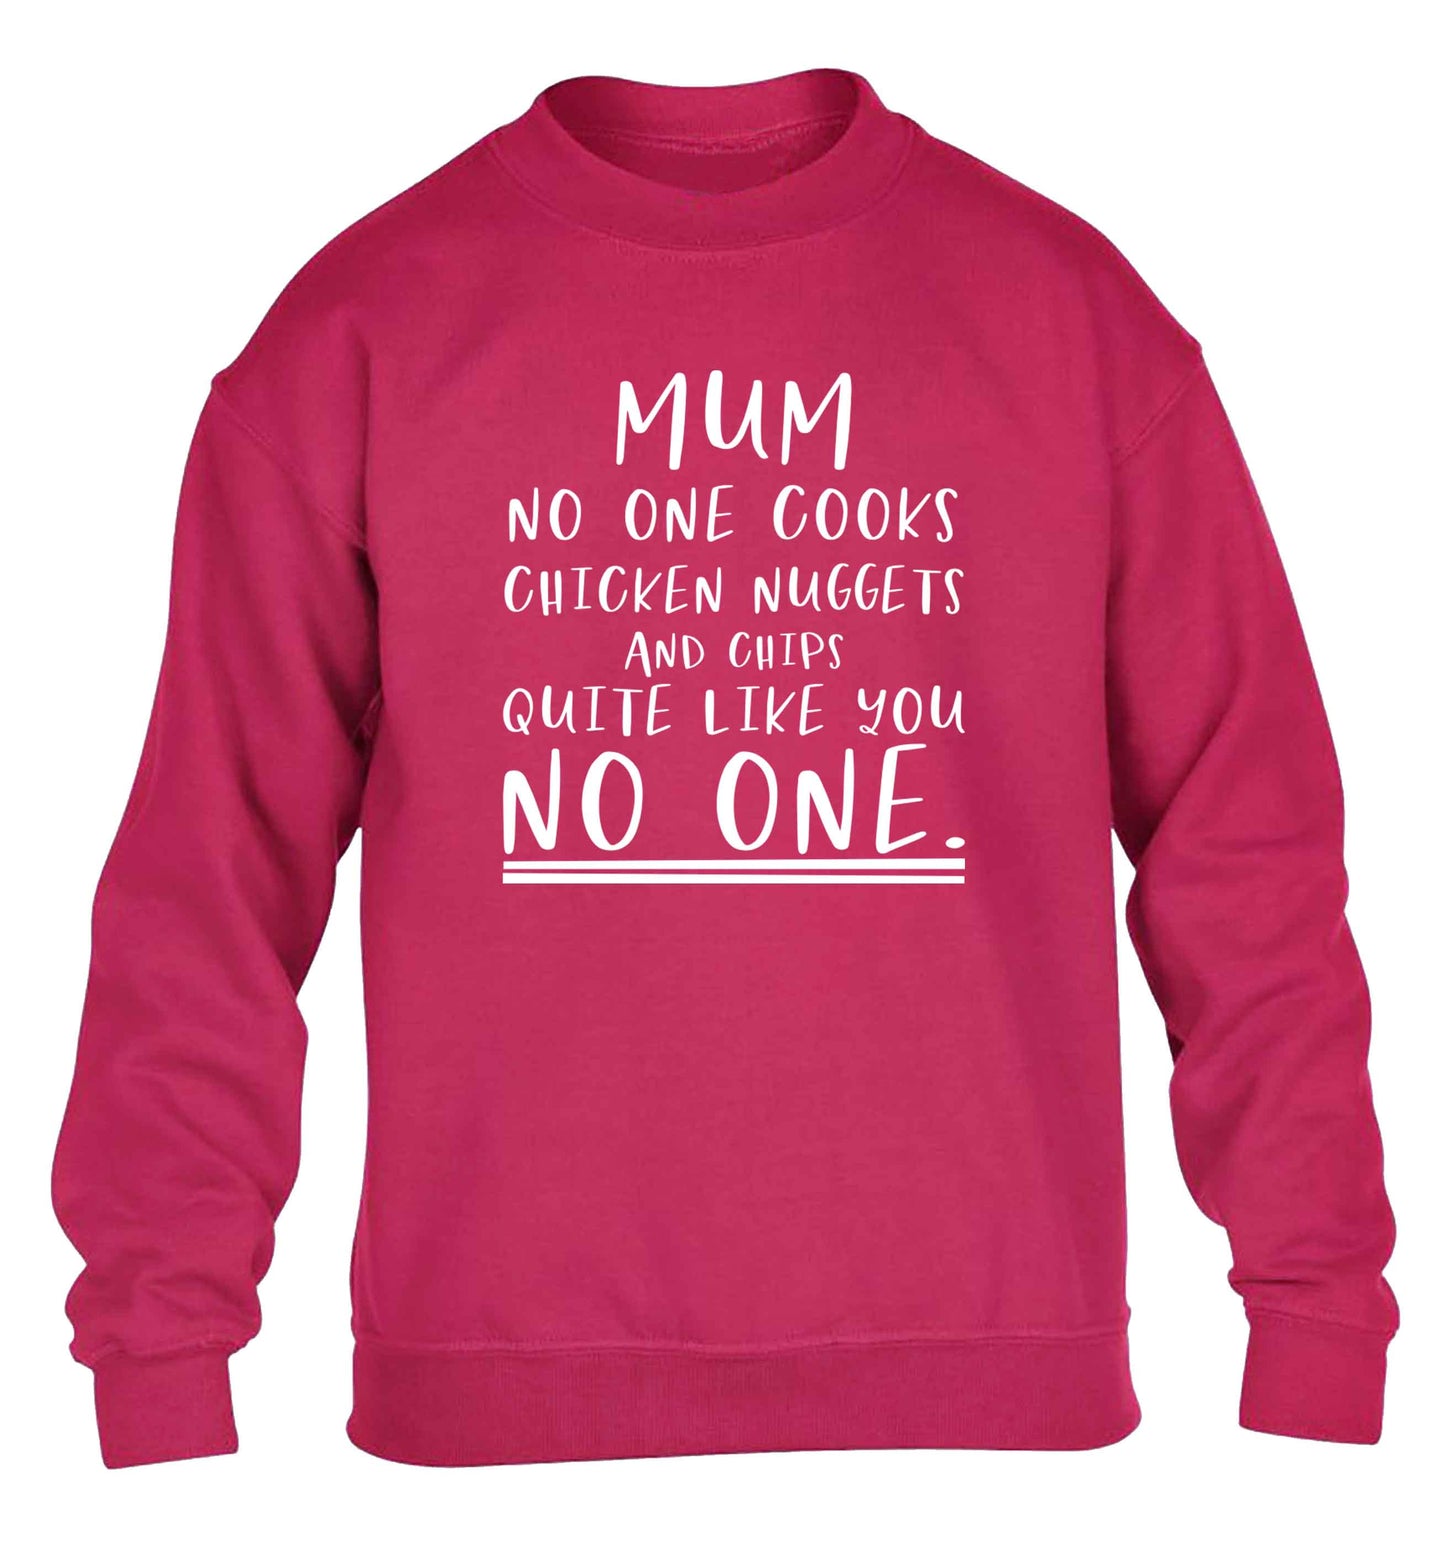 Super funny sassy gift for mother's day or birthday!  Mum no one cooks chicken nuggets and chips like you no one children's pink sweater 12-13 Years